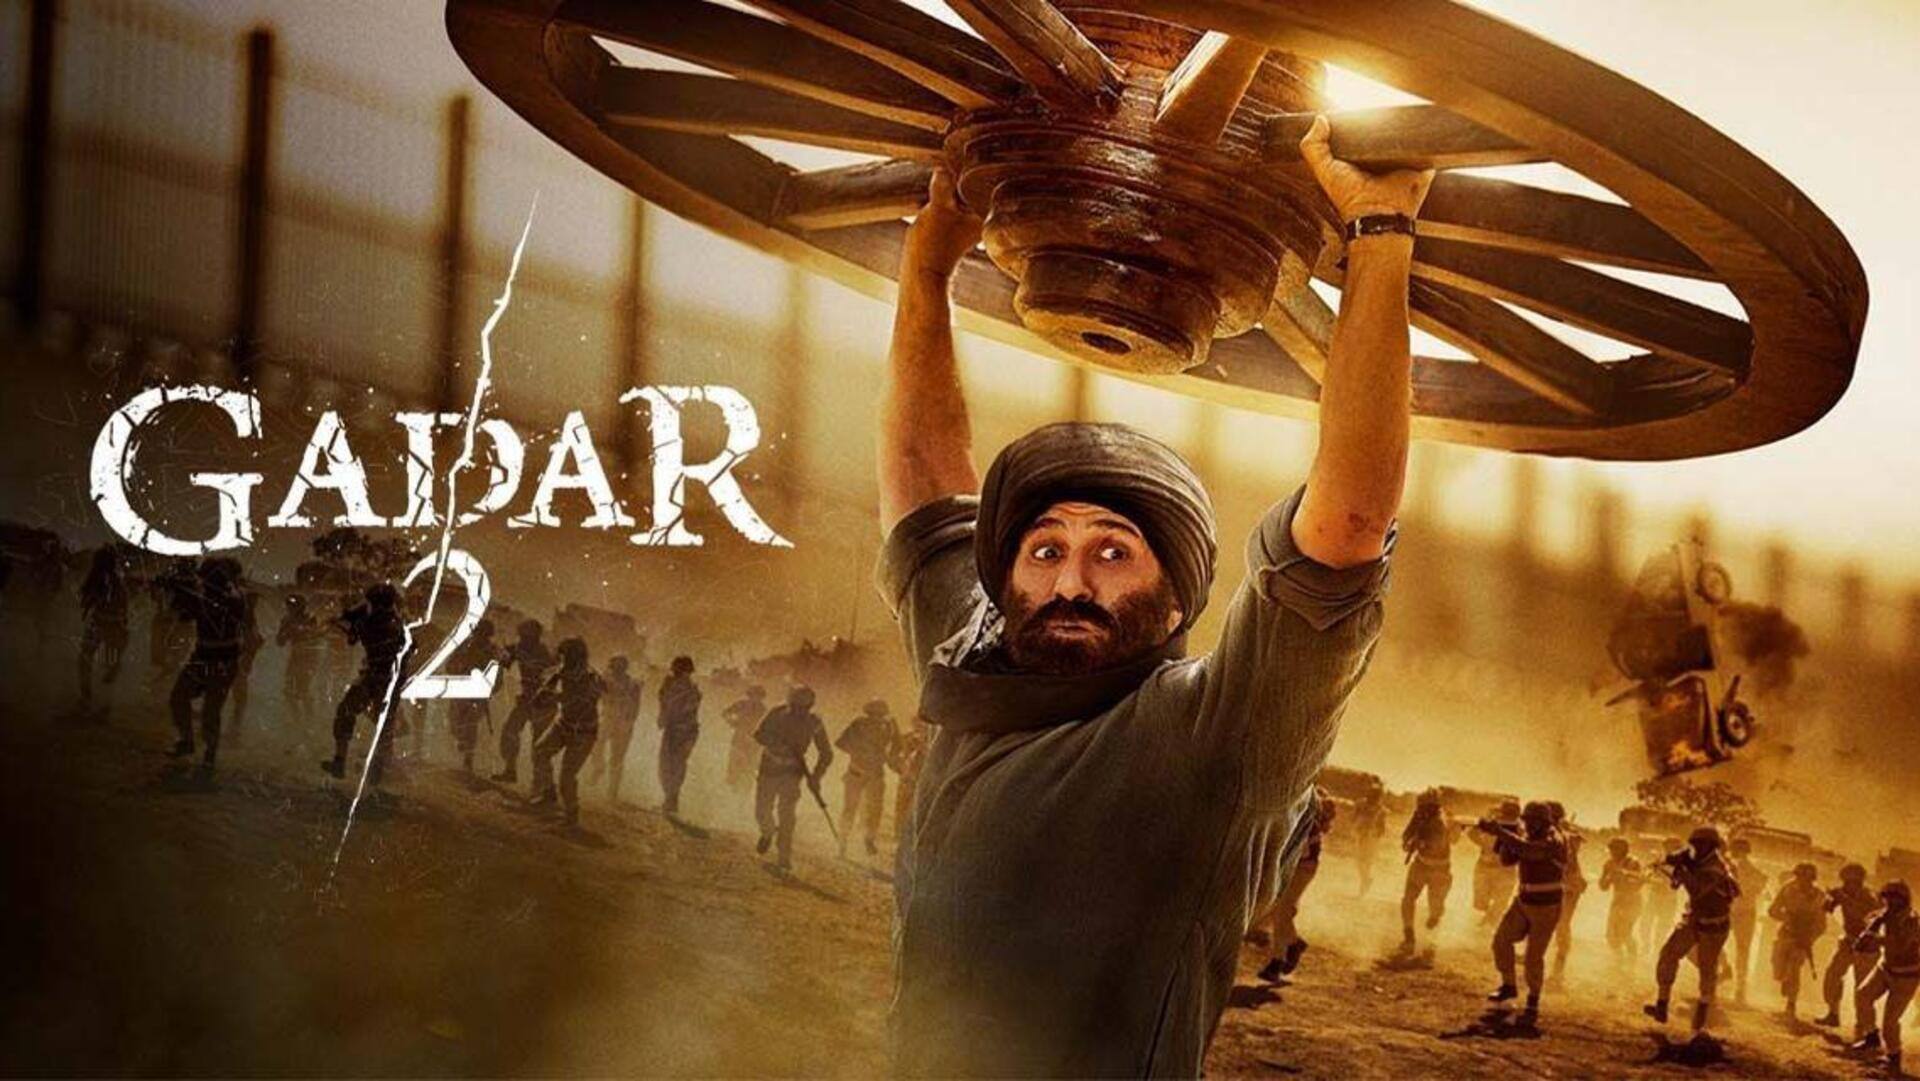 Box office collection: 'Gadar 2' is slow but growing